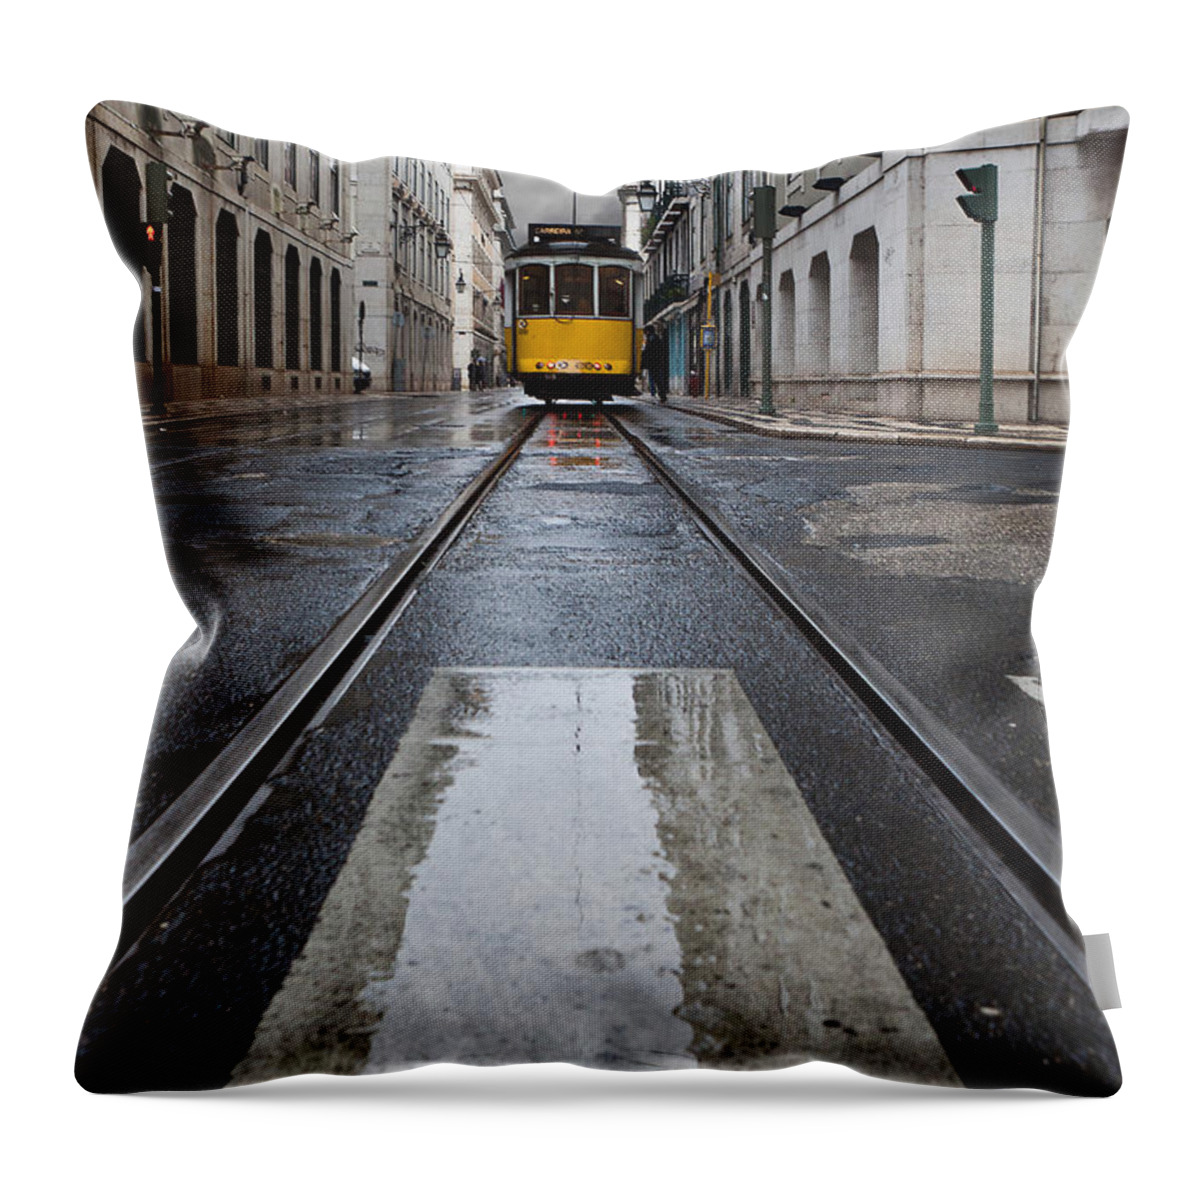 Lisbon Throw Pillow featuring the photograph The 28 by Jorge Maia